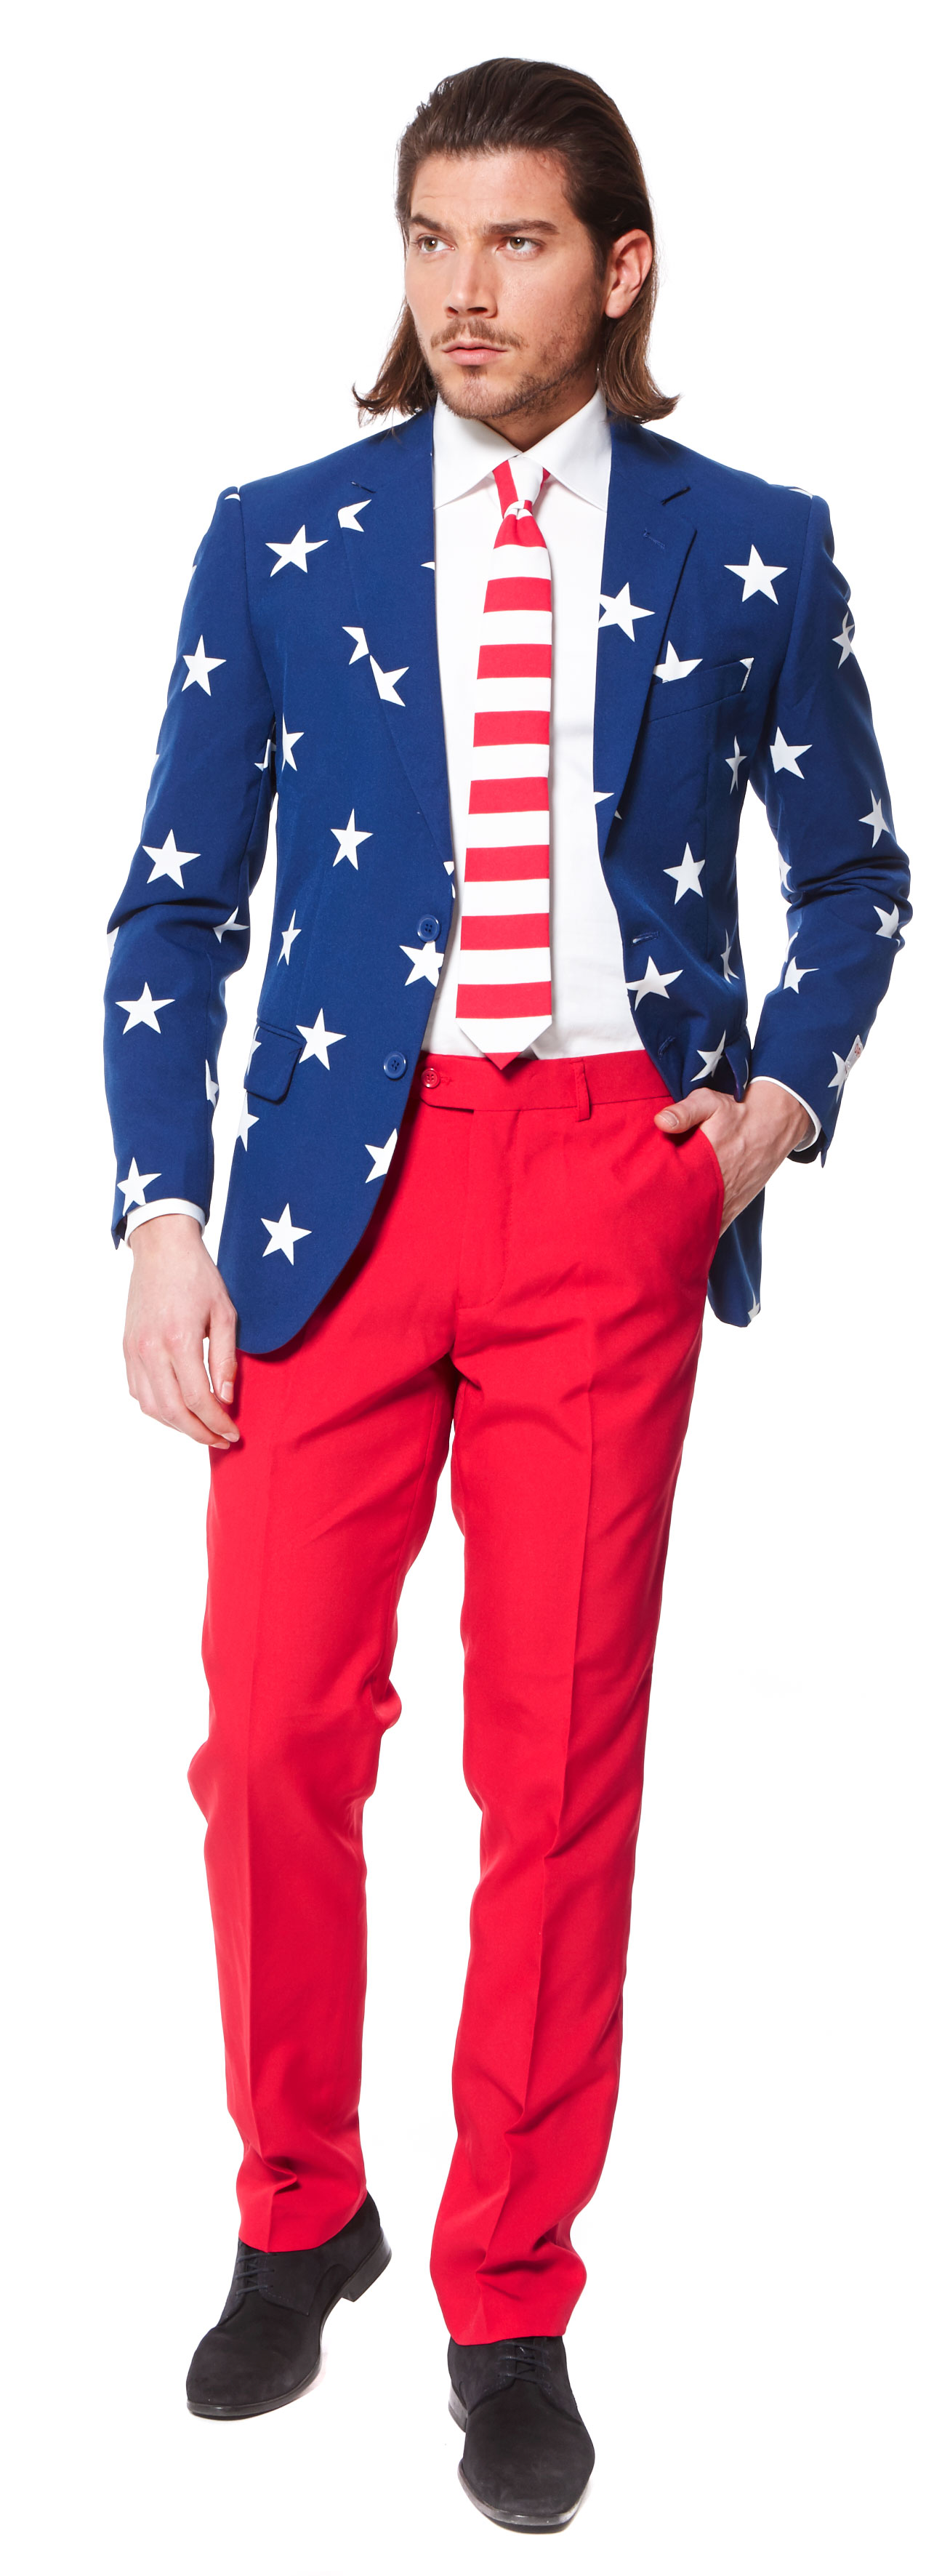 OppoSuits Men's Stars and Stripes Americana Suit - image 1 of 3